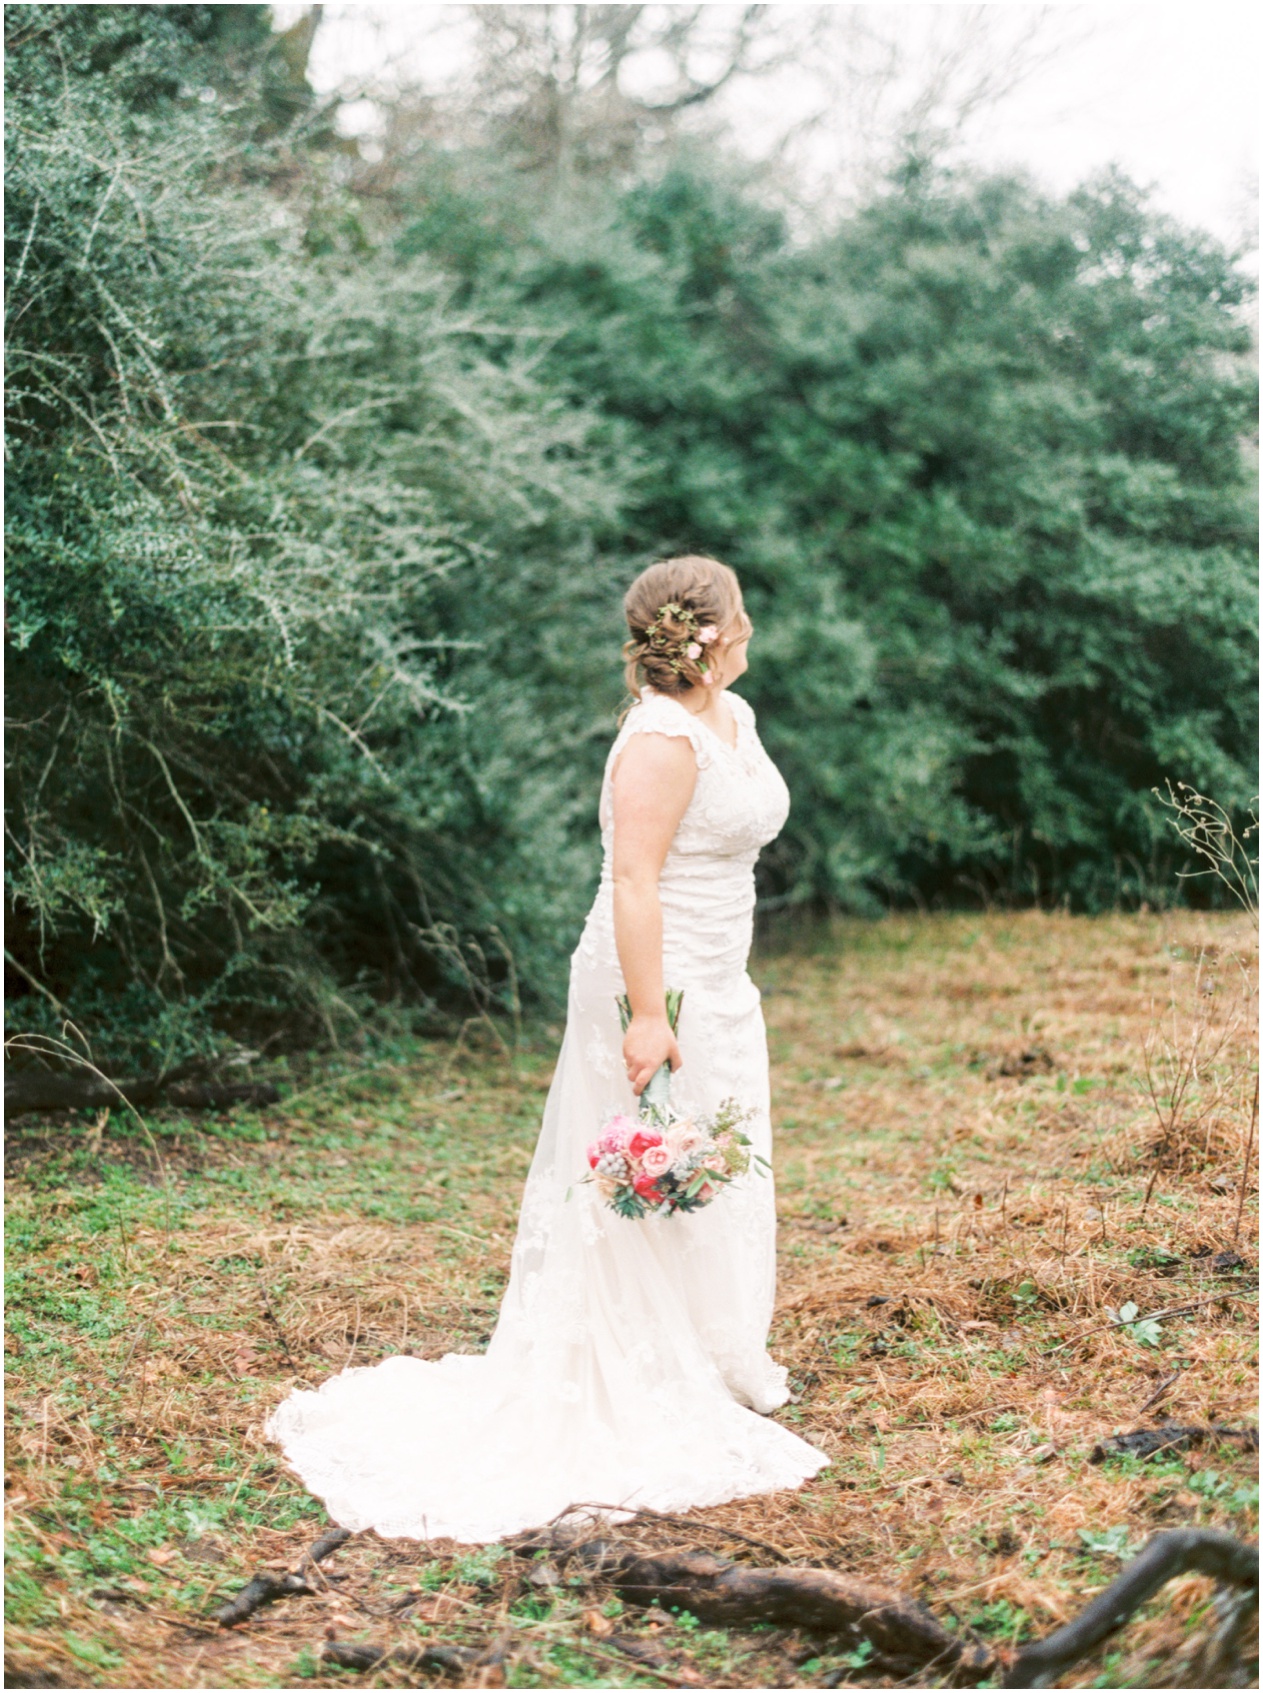 Sarah Best Photography - Claire's Bridals - The Amish Barn at Edge-32_STP.jpg